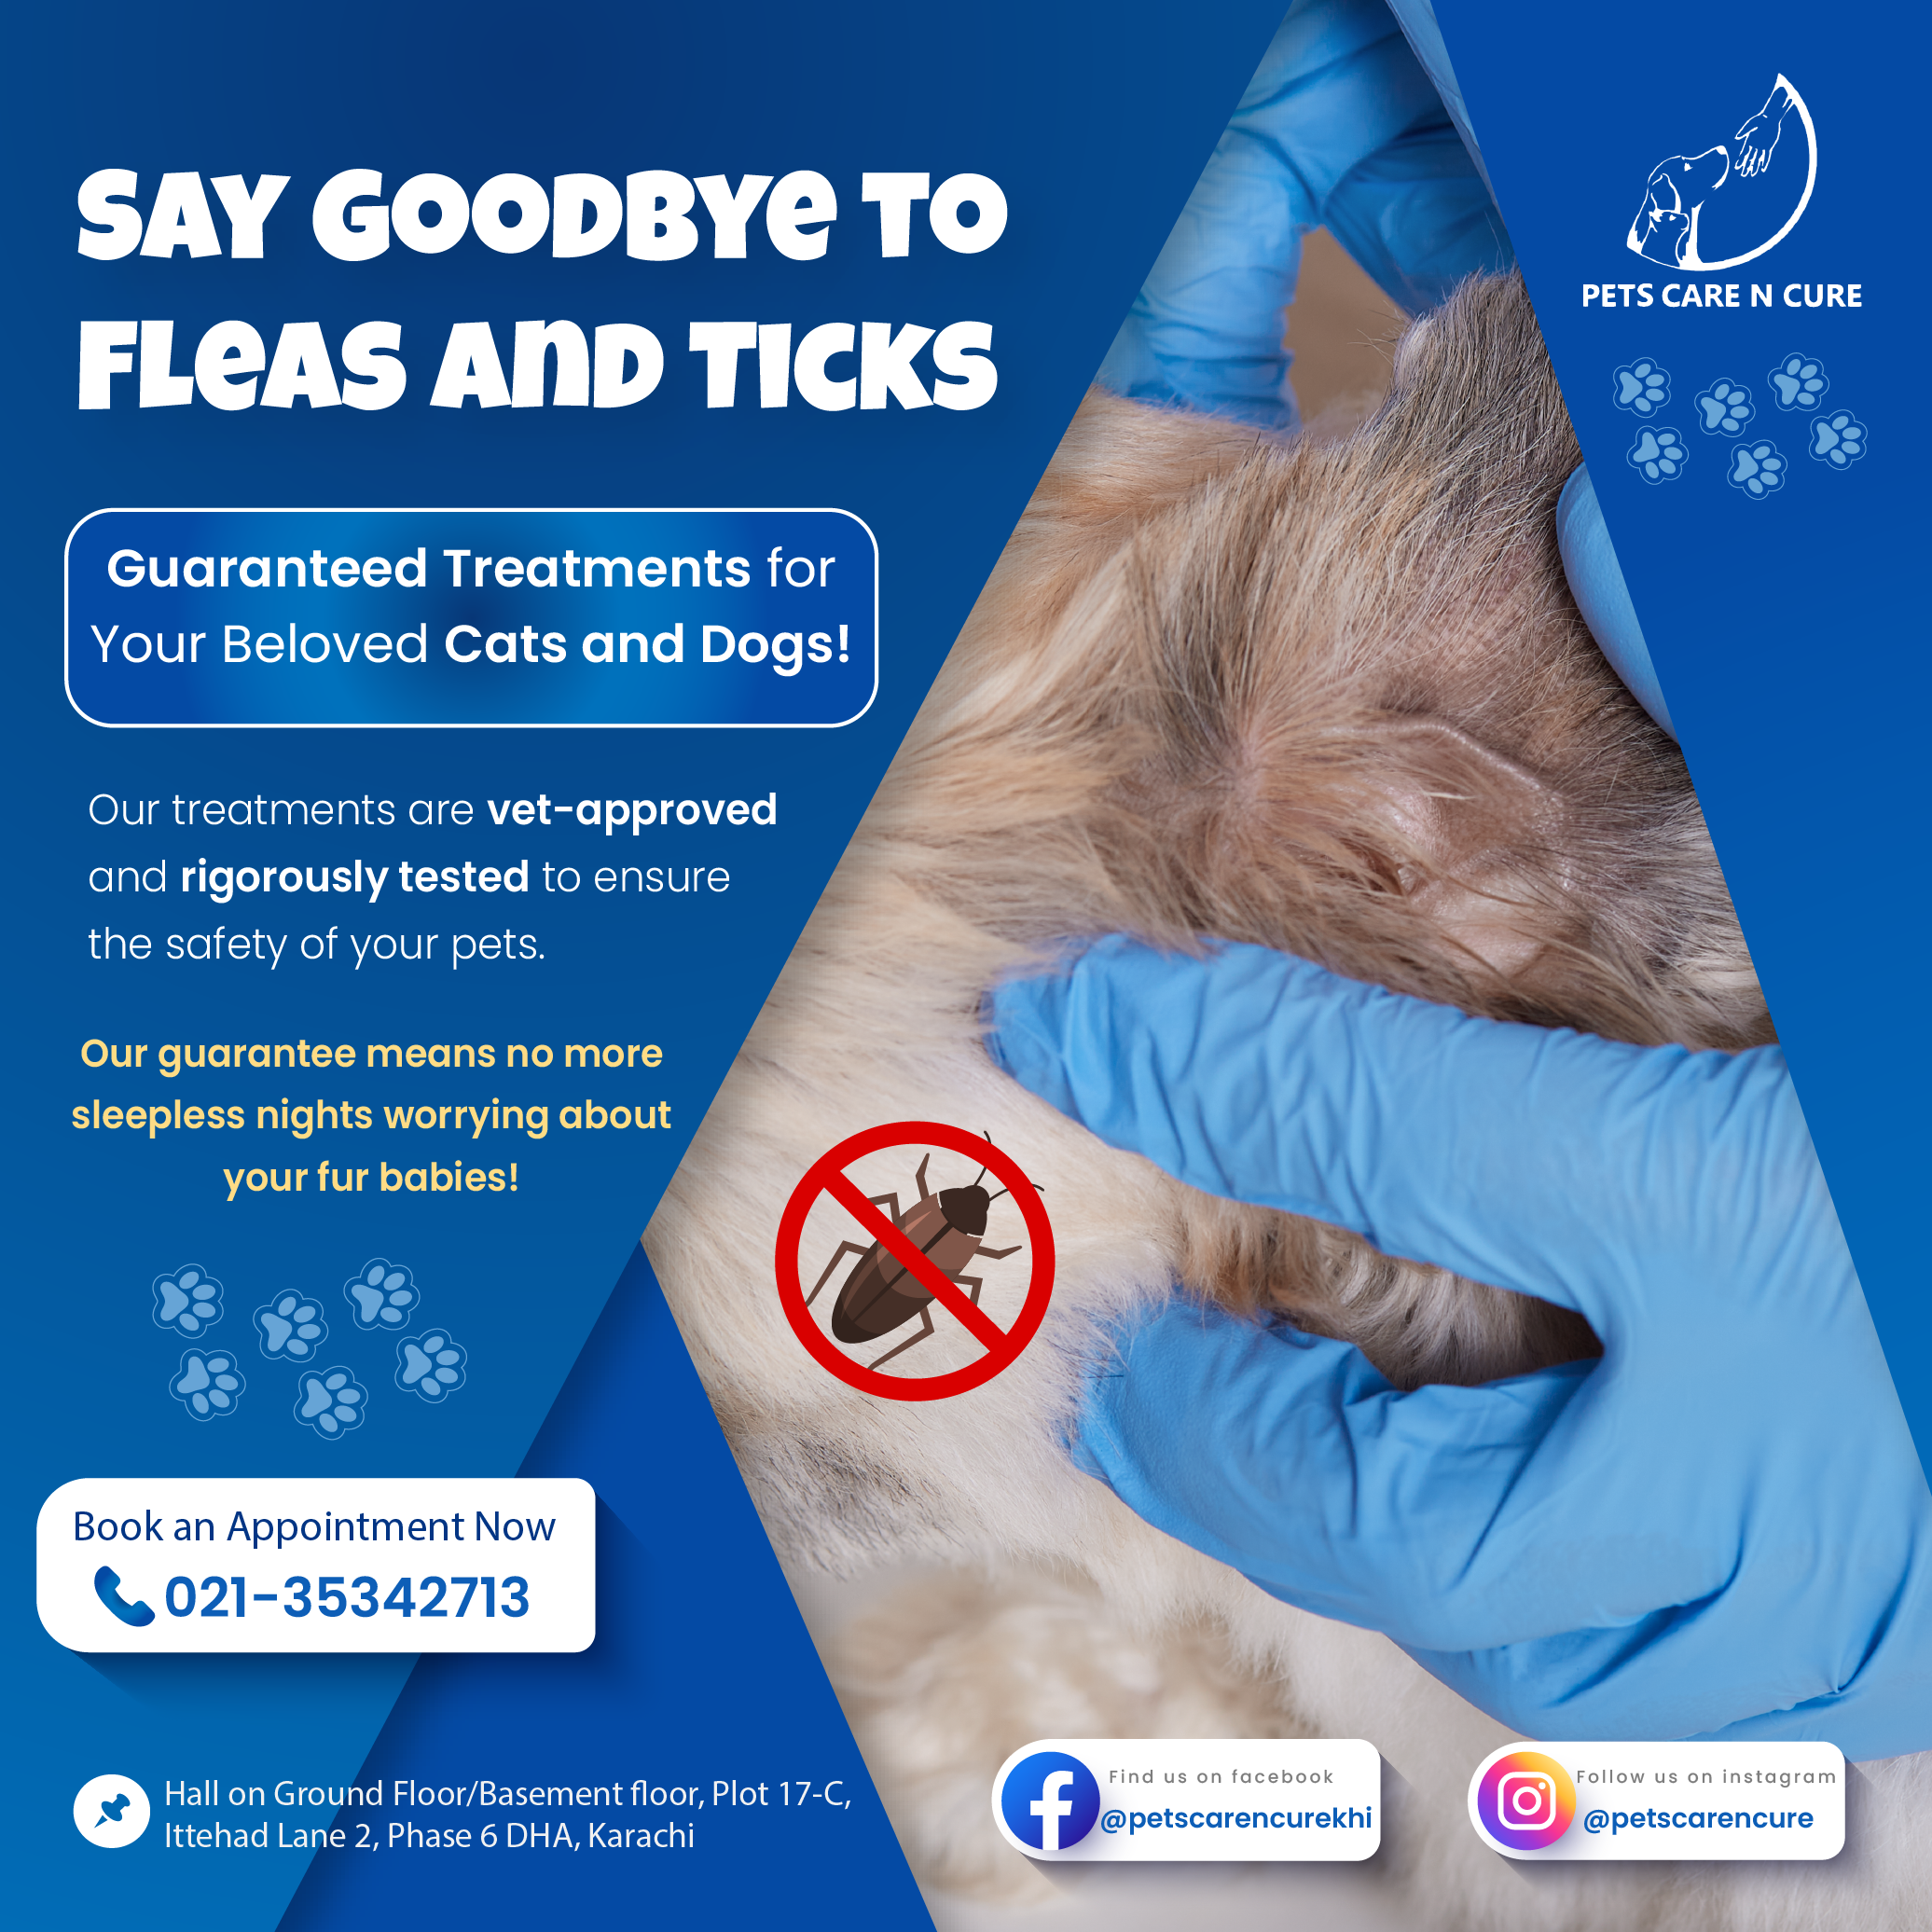 Say goodbye to these annoying parasites with our guaranteed Fleas and Ticks Treatment that will keep your cats and dogs happy, healthy, and itch-free.